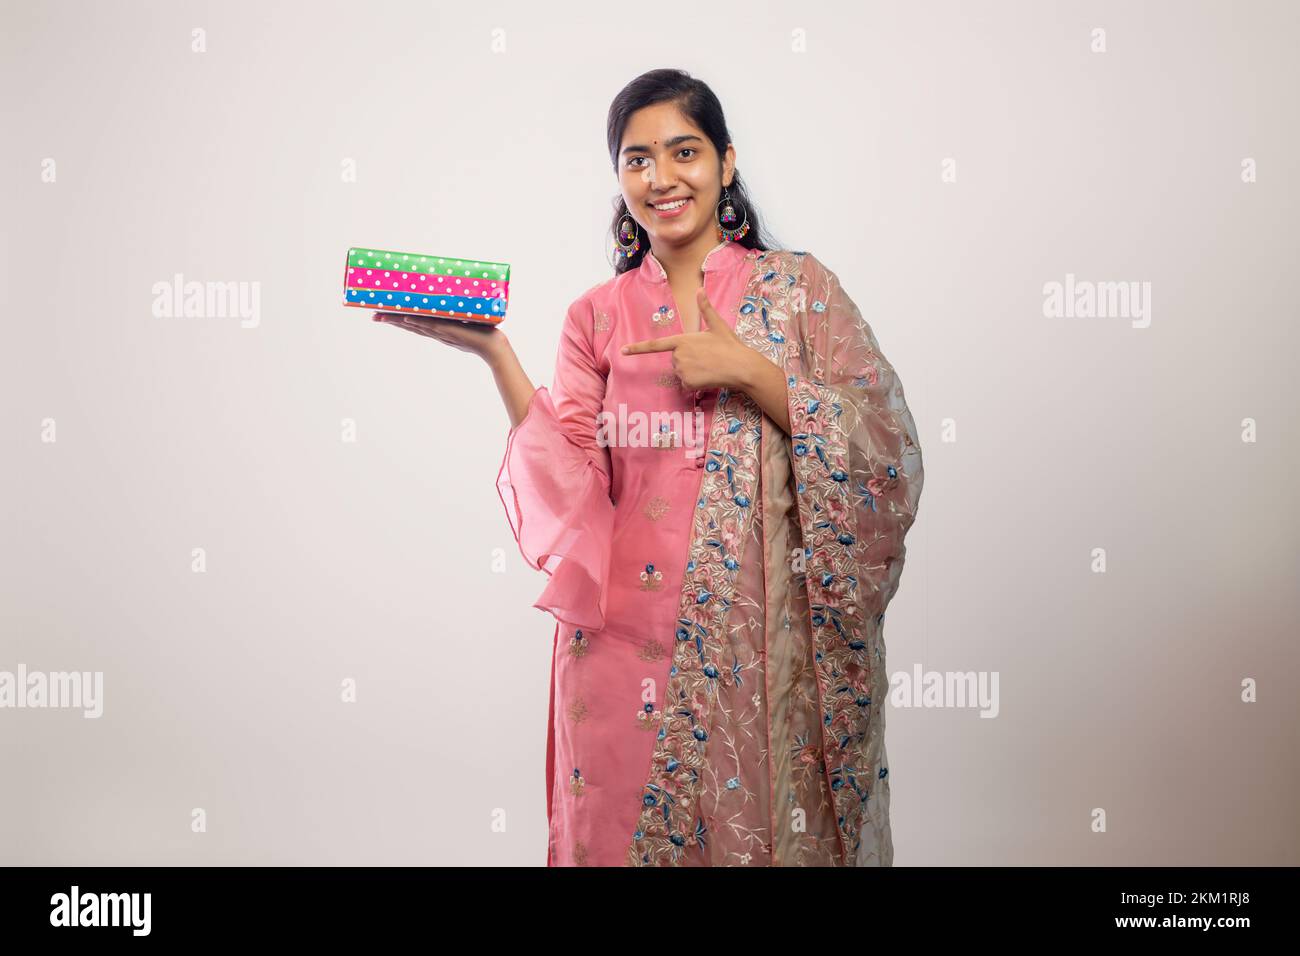 young Teenager girl  pointing a gift box on Diwali Stock Photo